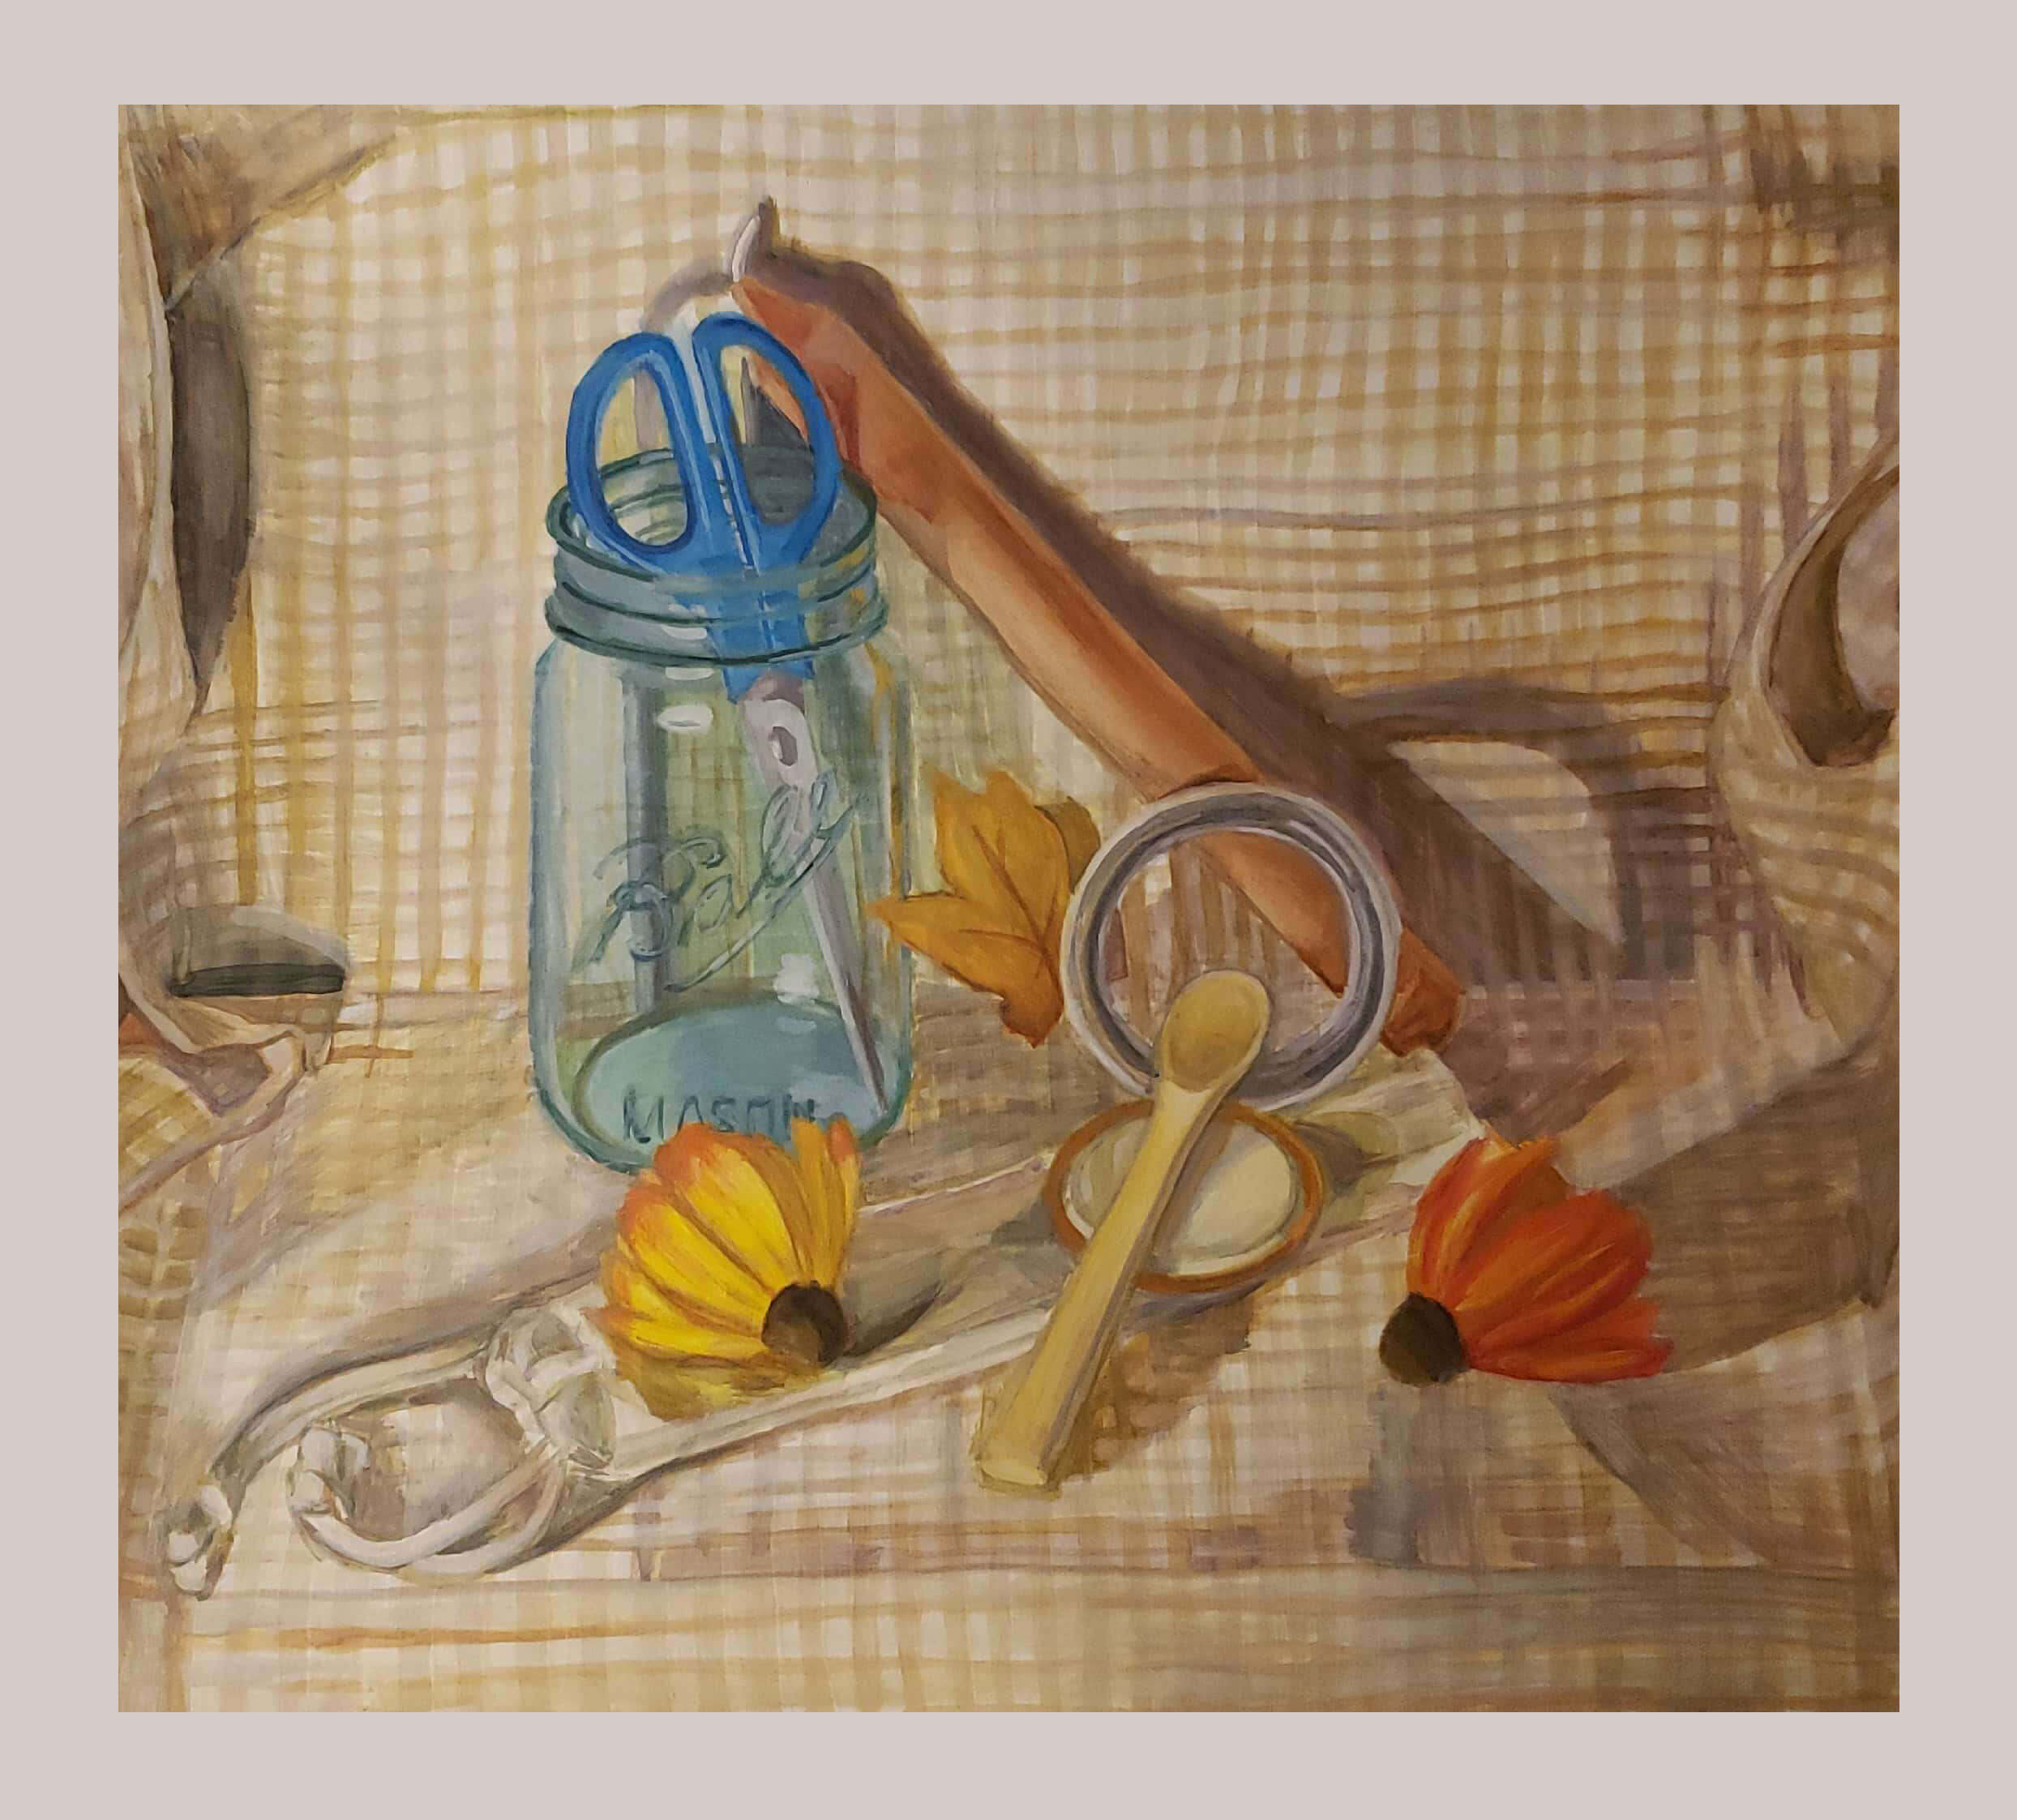 Painting of props including flowers, a candle, and a glass jar.